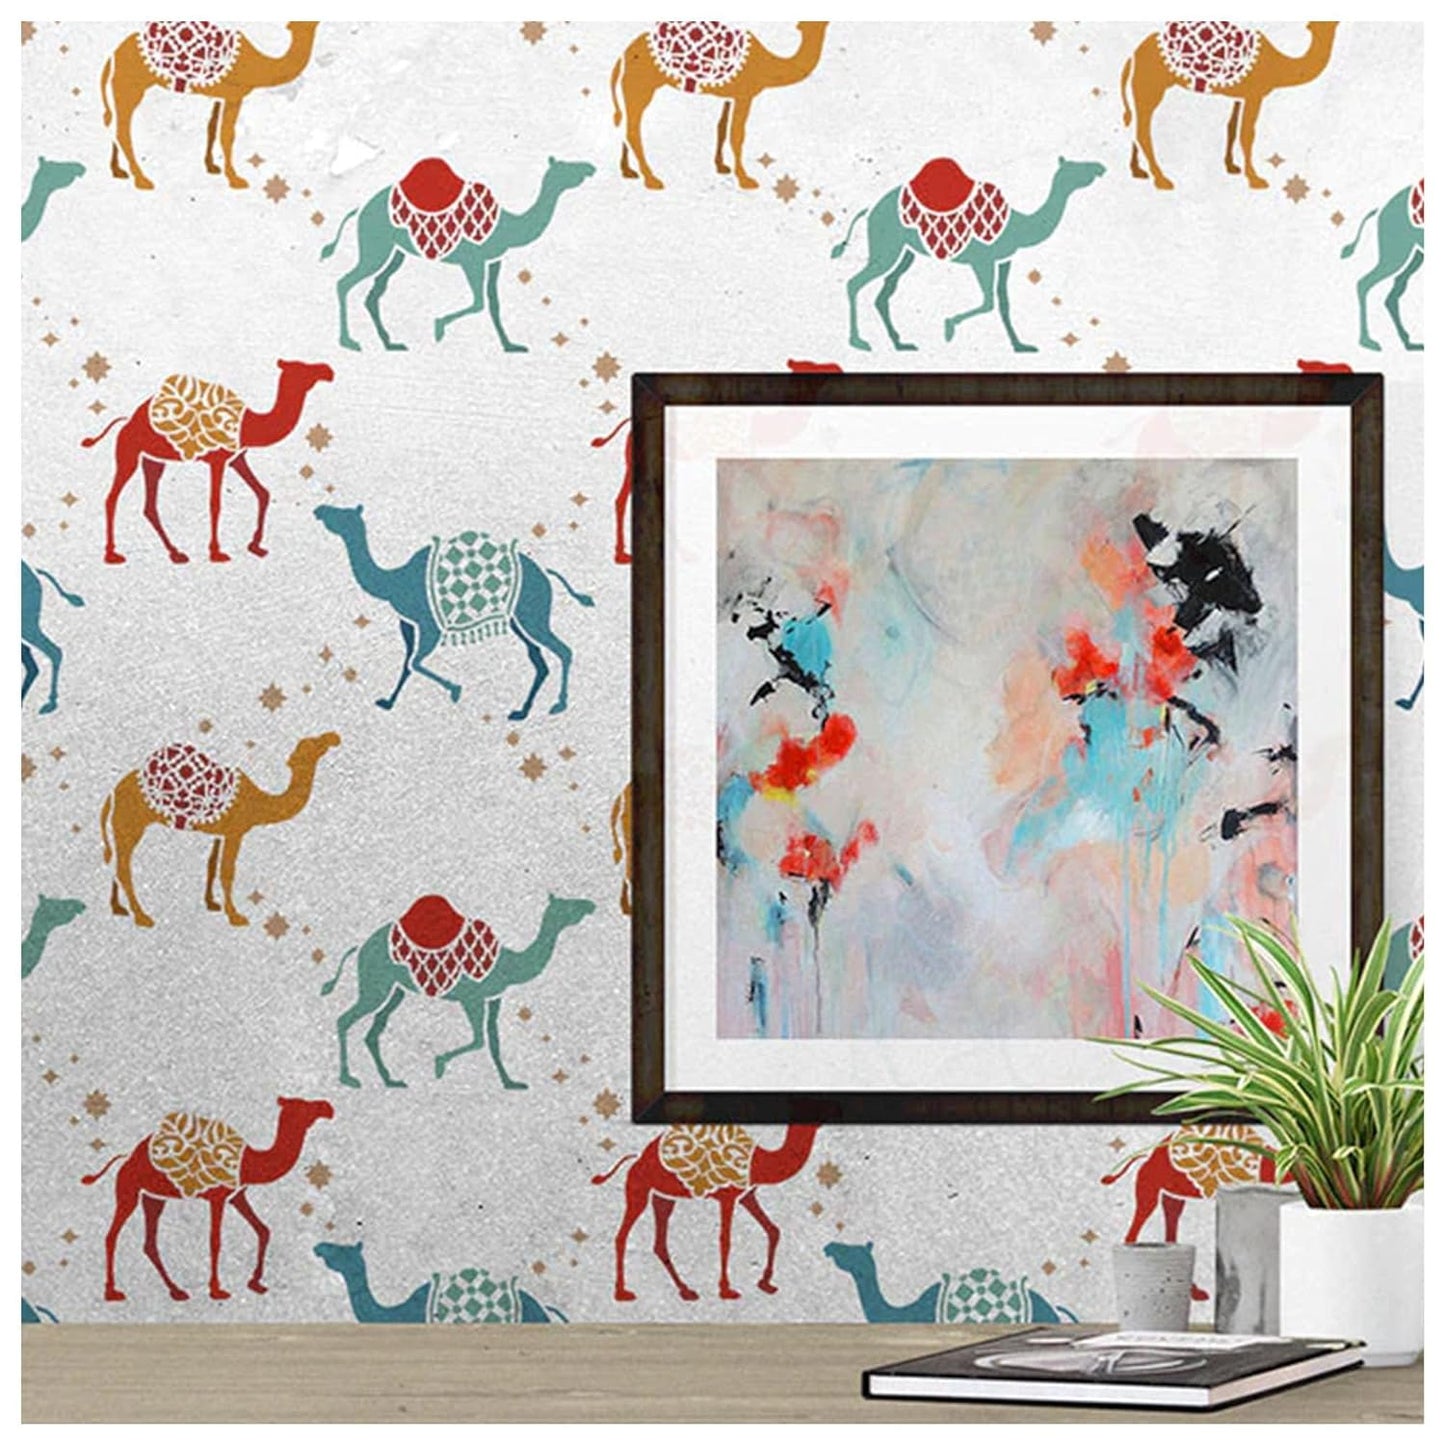 Latest Large Camel Safari Wall Stencil -Pack of 1, Sheet Size 24 x 36 inch|Design Size 21 x 30 inch.